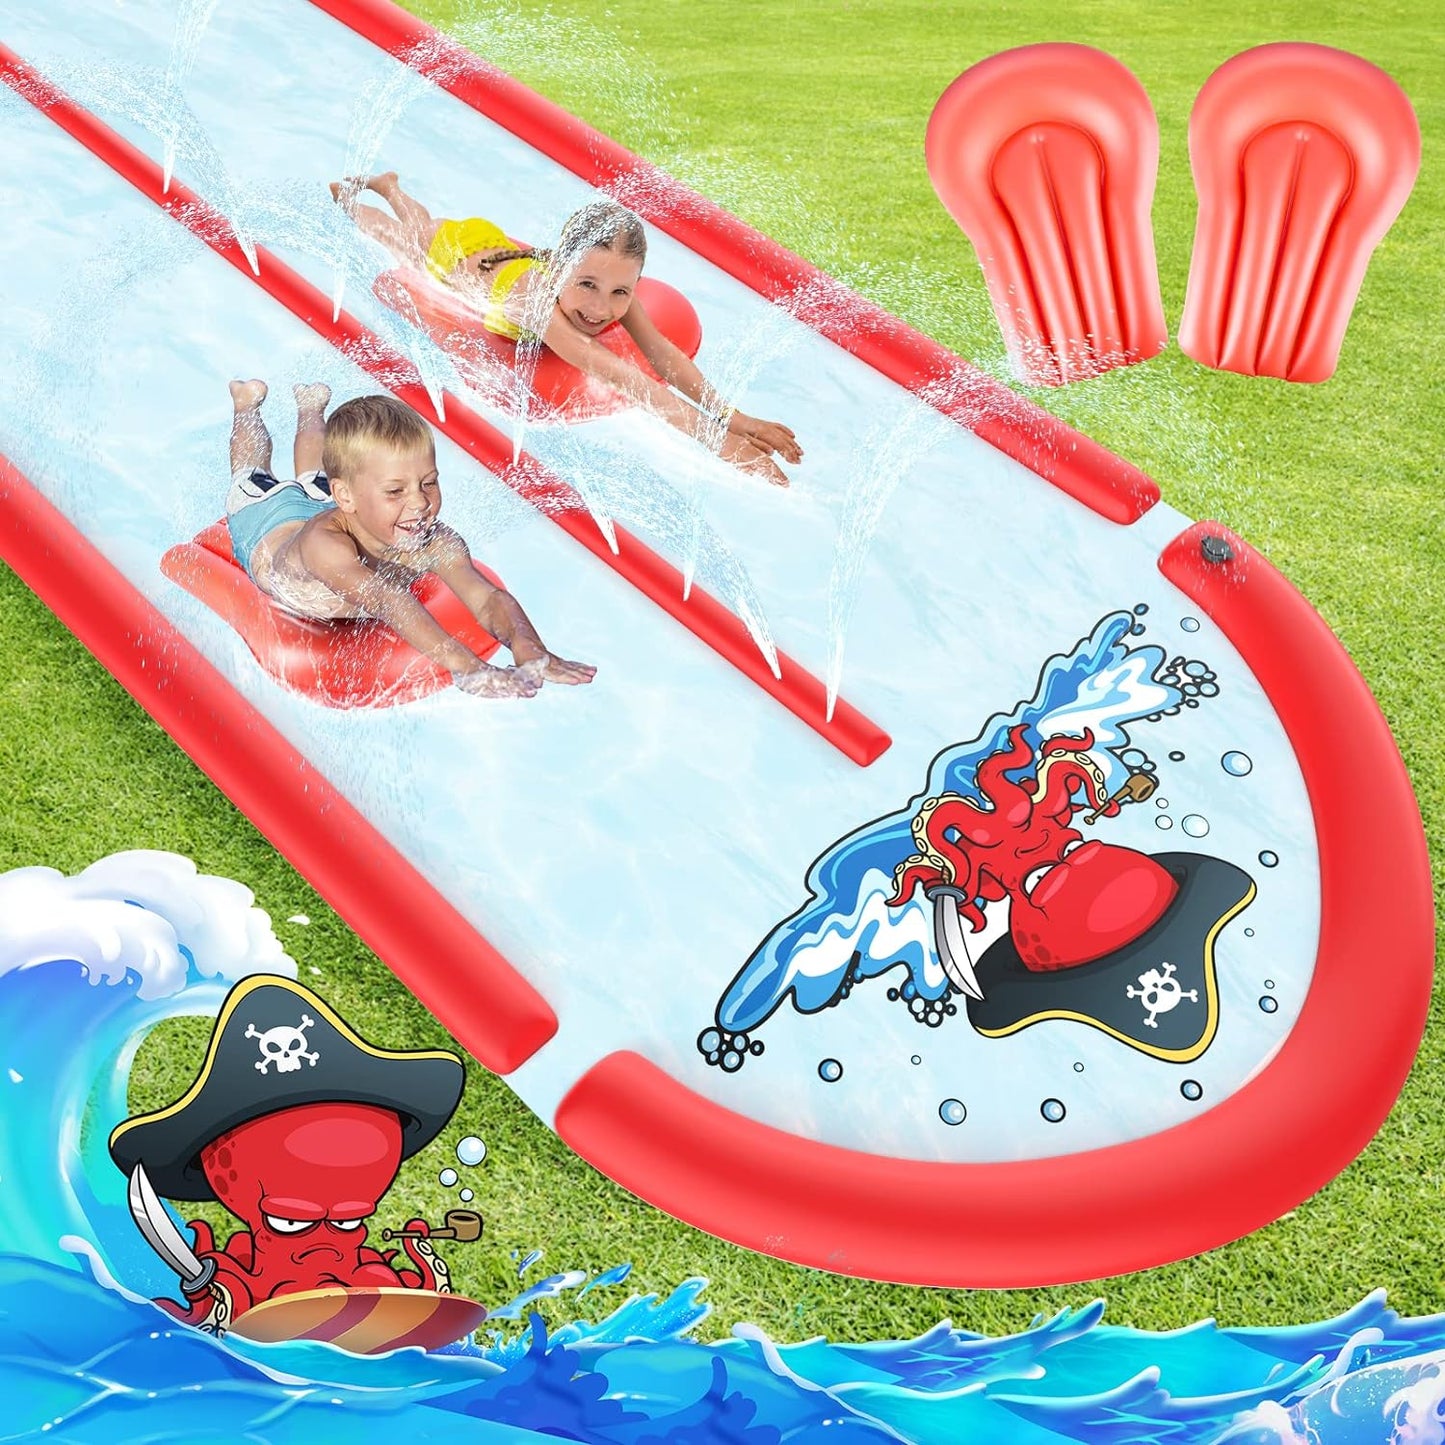 Slip and Slide Lawn Water Slide with 2 Bodyboards, 20FT Slip N Slide Heavy Duty Double Lane for Kids Backyard Games with Sprinkler, Summer Outdoor Water Toys outside Play for Kids and Adults